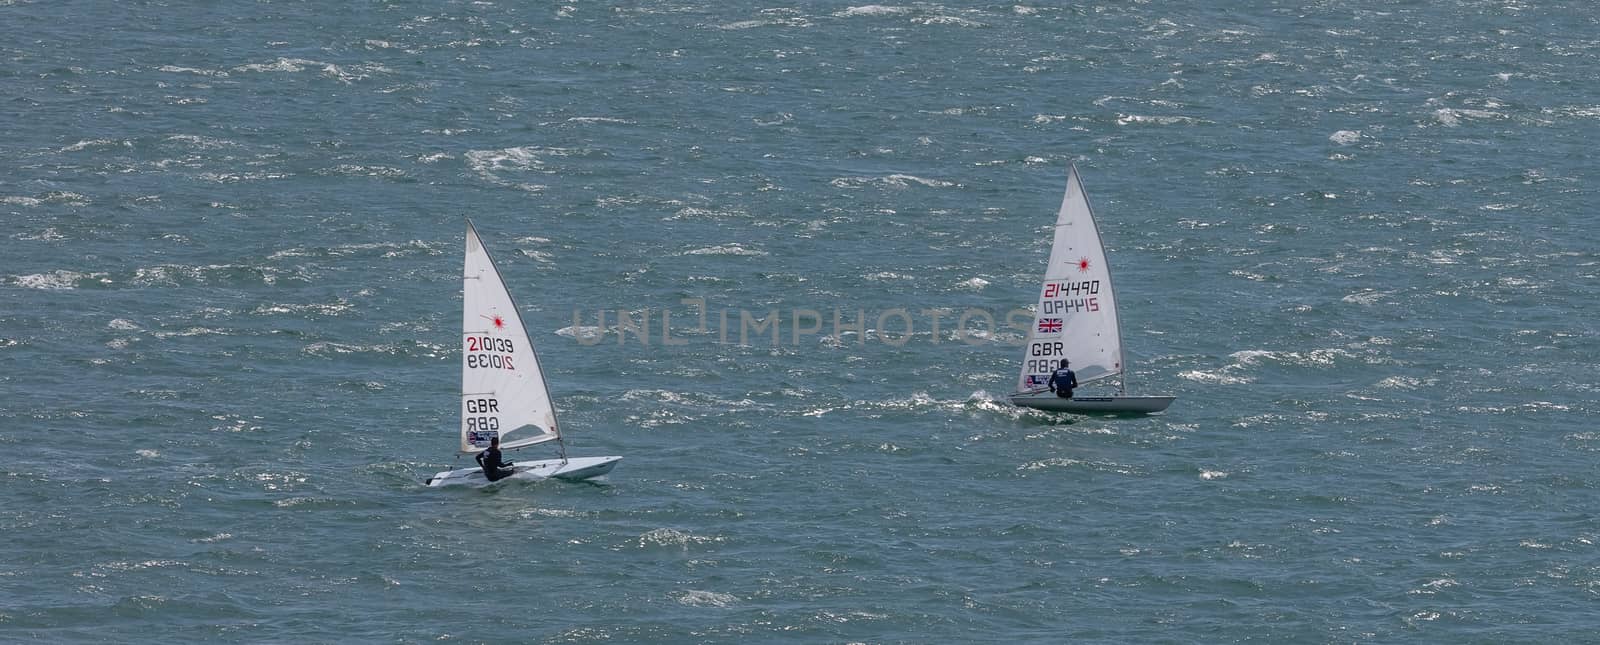 Aerial shot of the laser class racing dinghies by DamantisZ